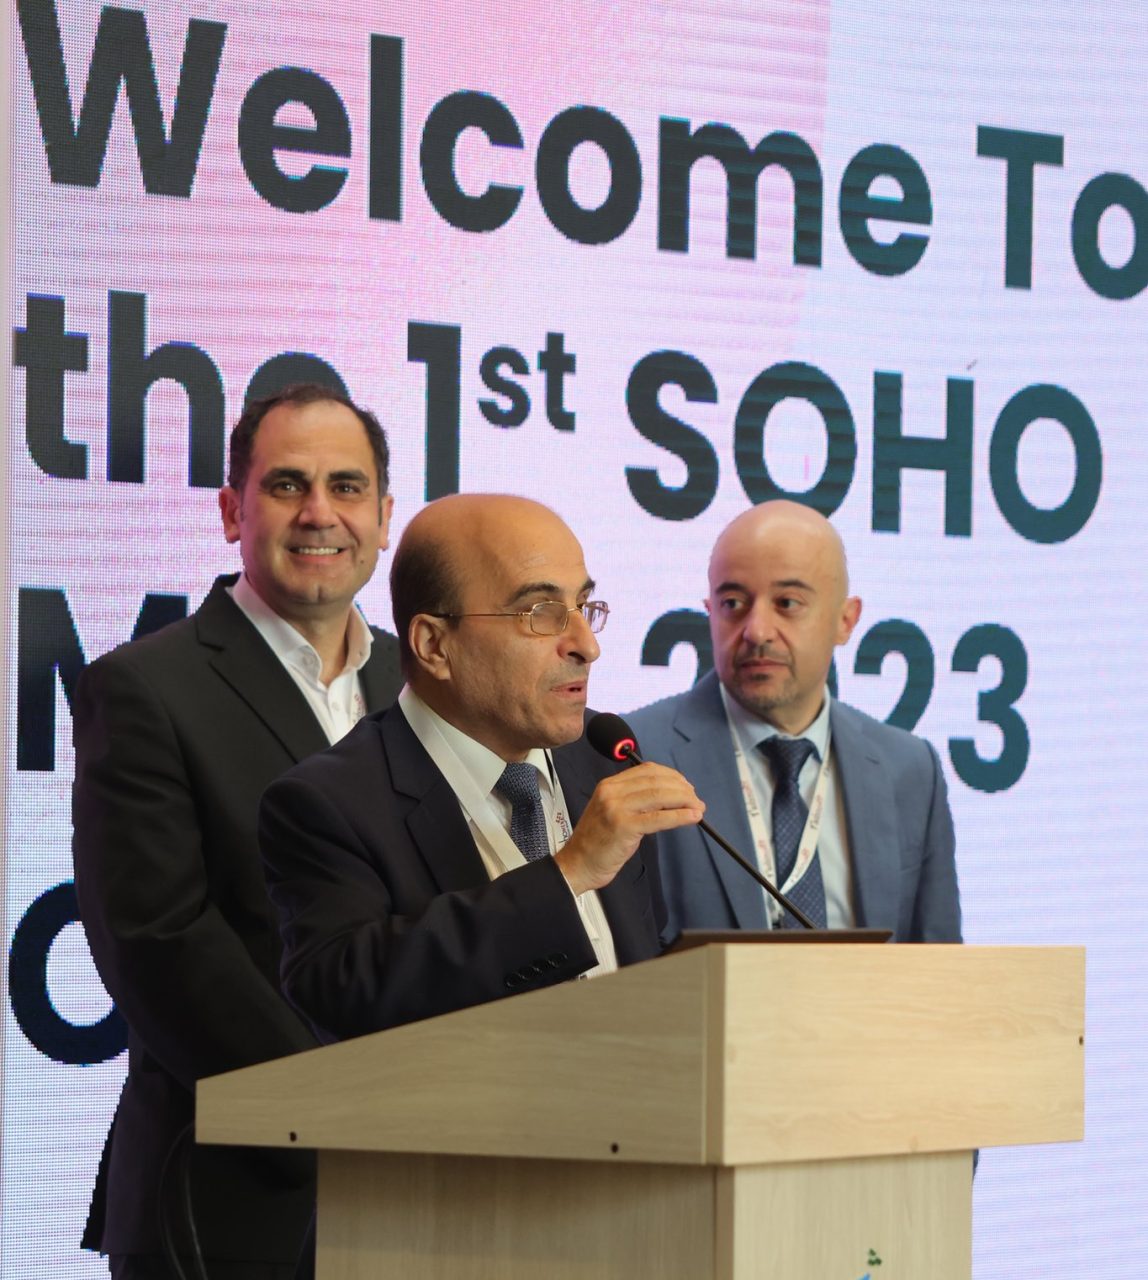 All our gratitude goes out to Dr. Ahmad Ibrahim for all his efforts in making the SOHOMENA23 conference happen! – Sohomena